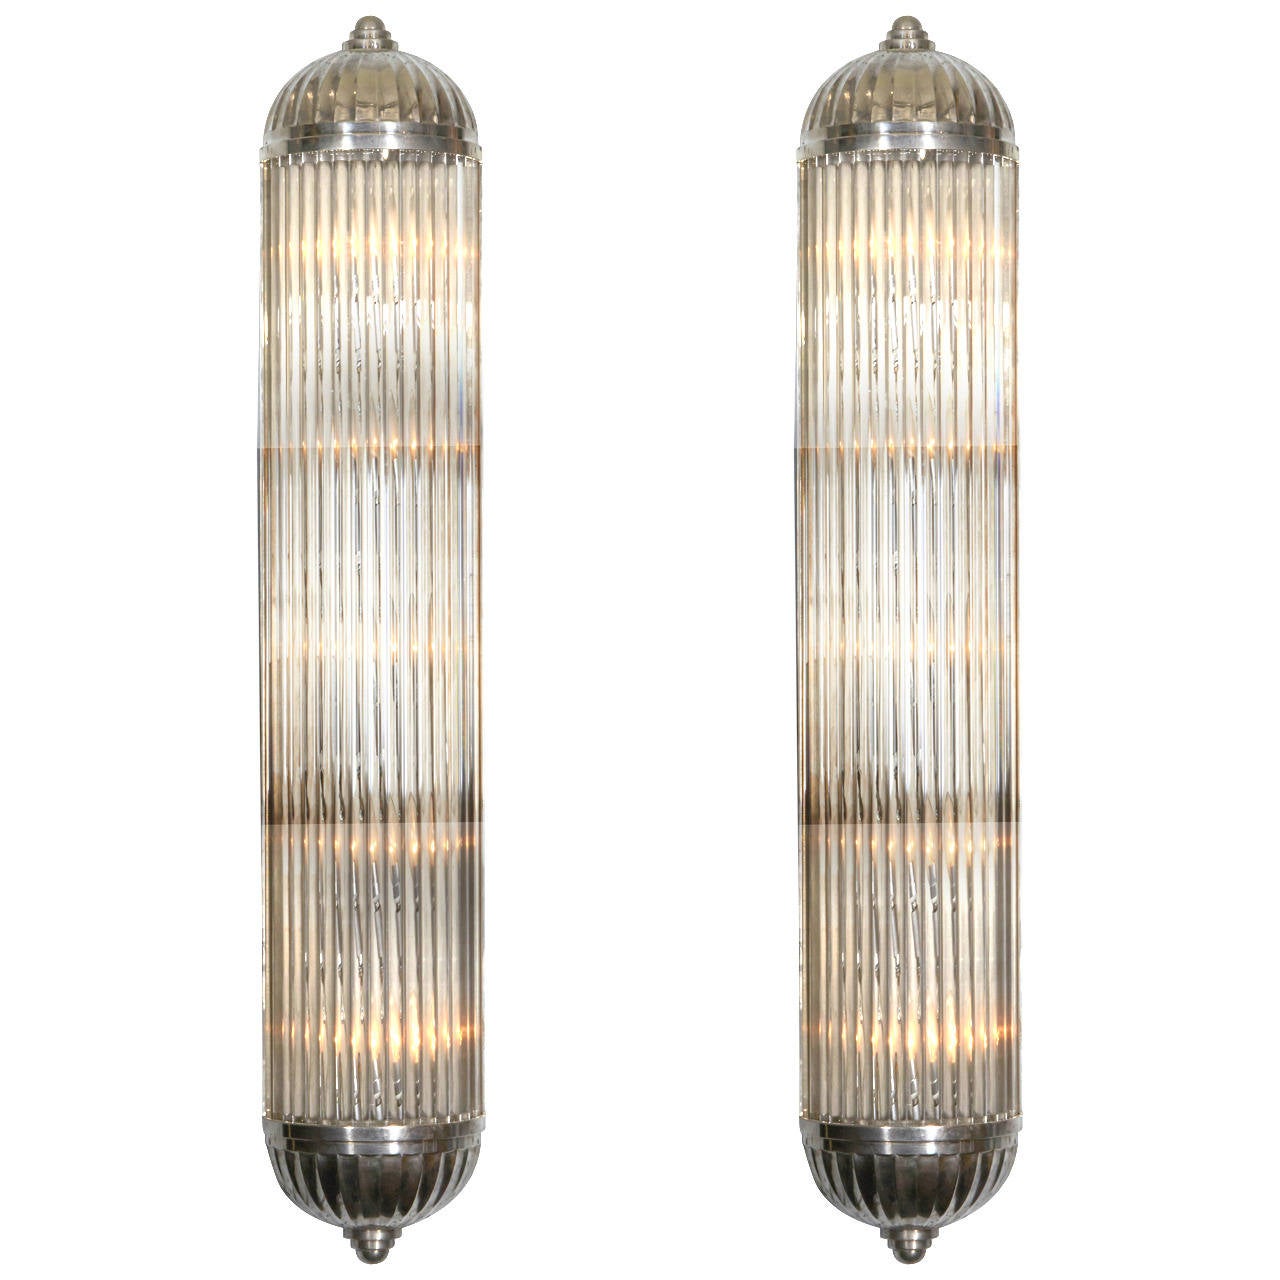  French Modernist Long Tubular Sconces by Petitot